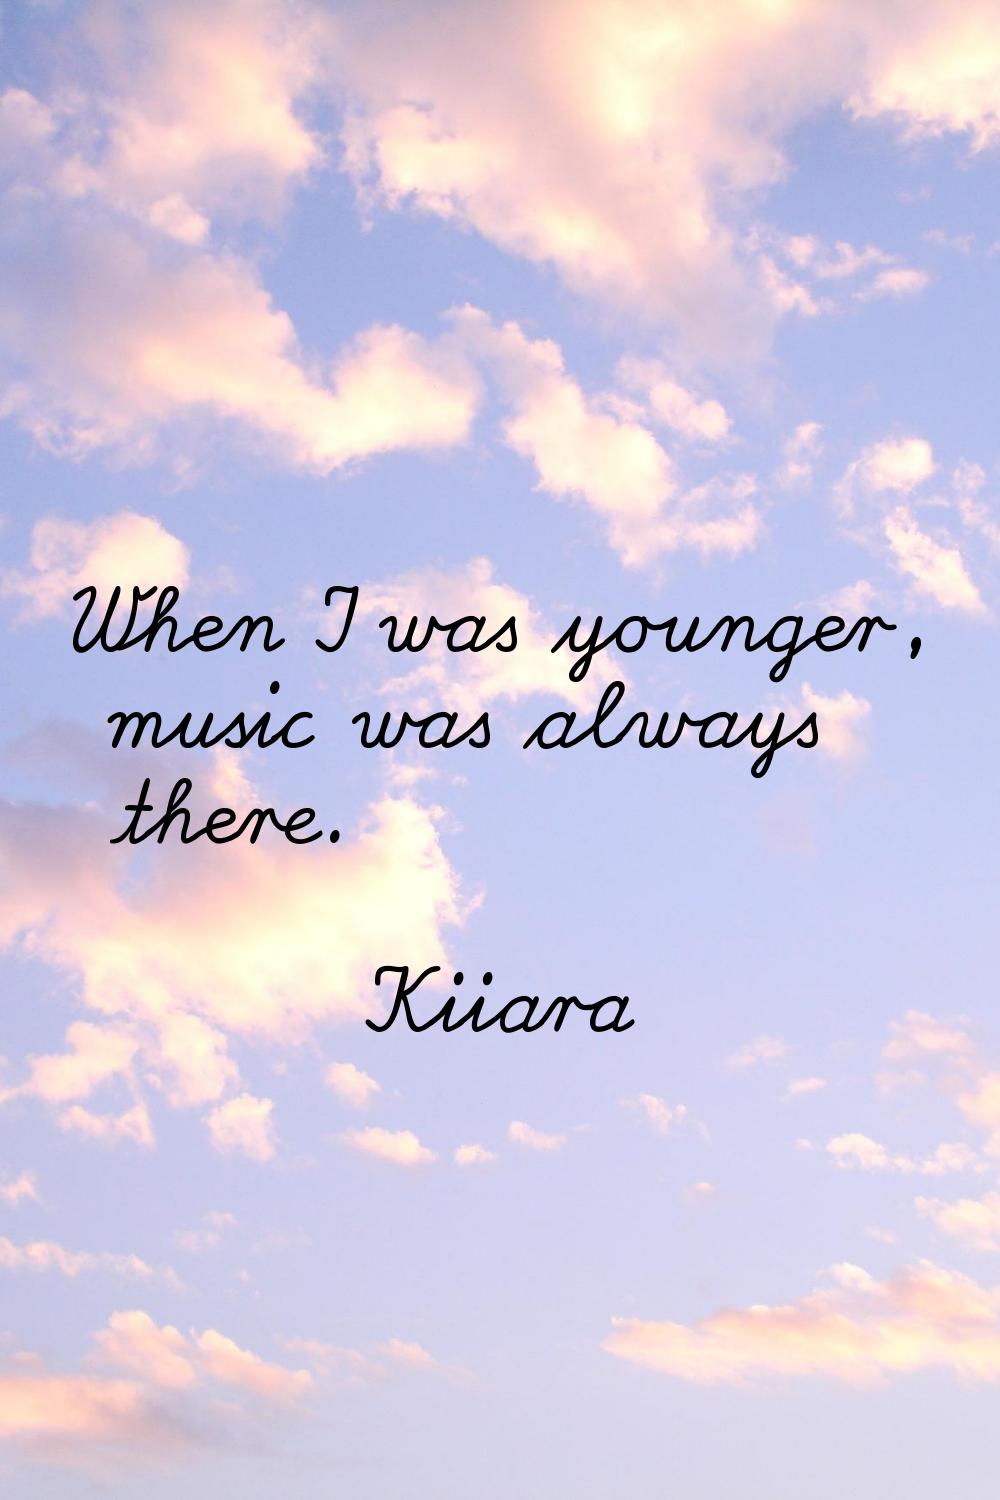 When I was younger, music was always there.